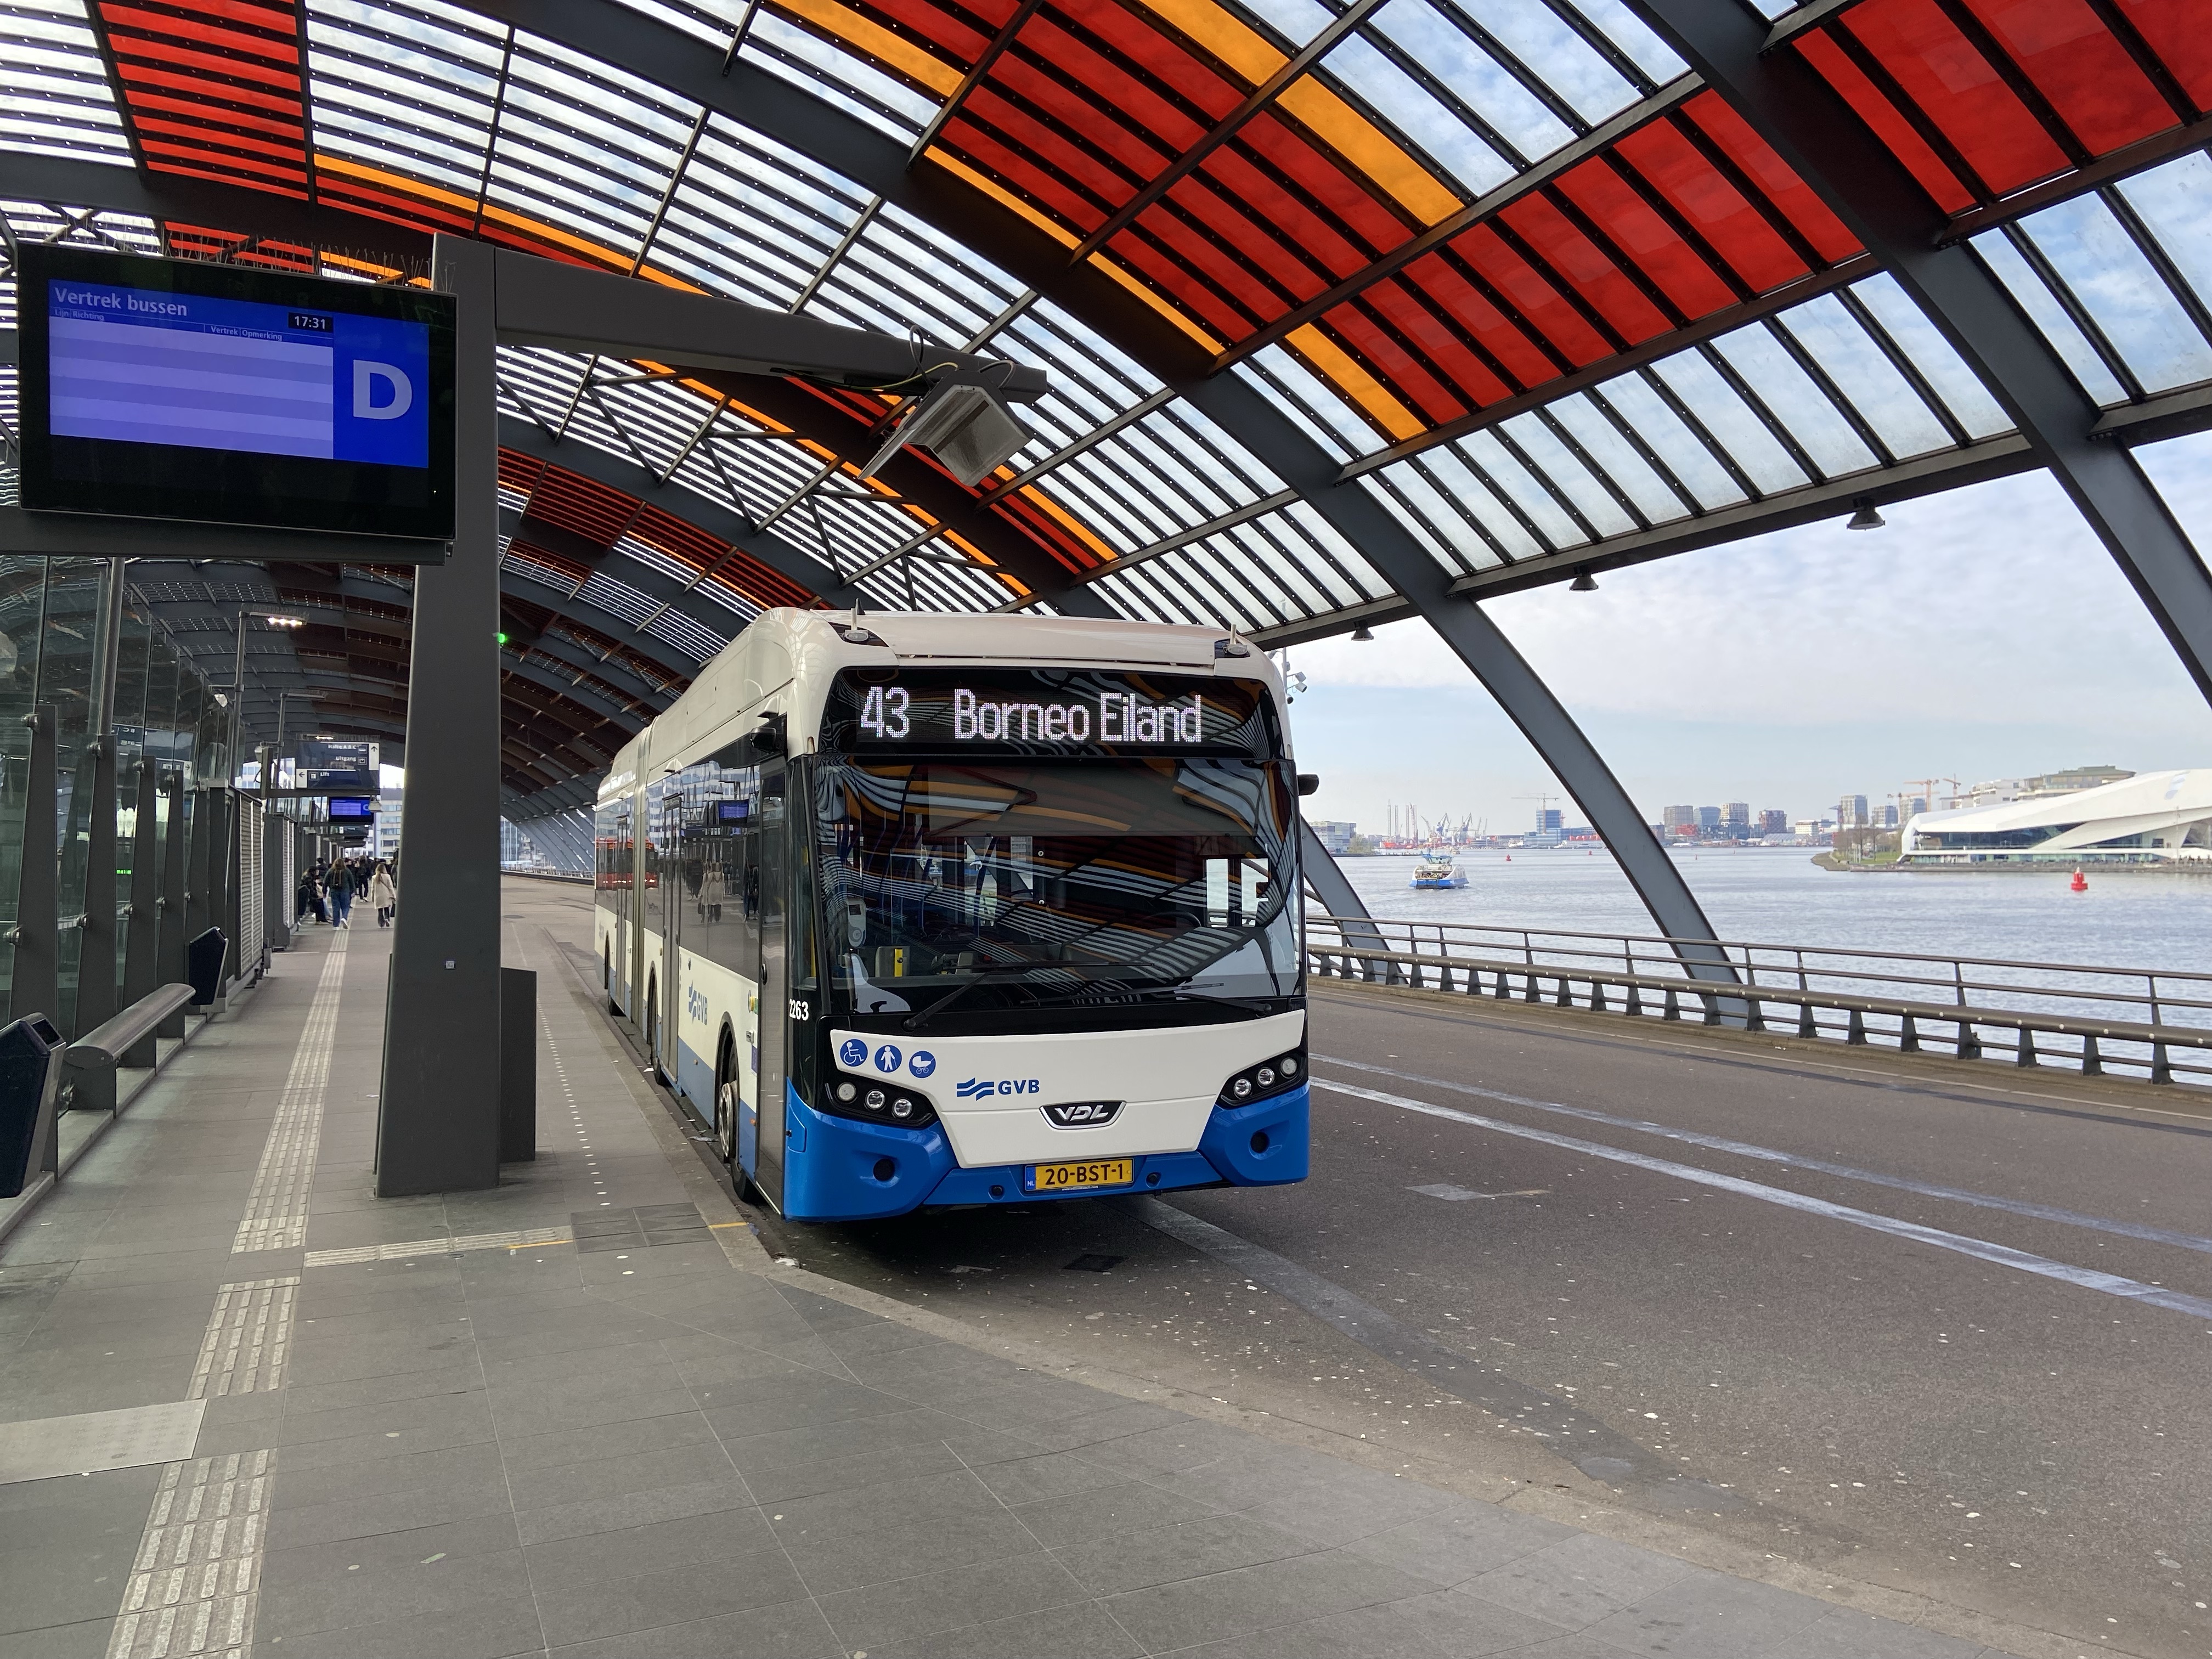 Charging 159 electric buses the smart way: GVB – the operator of Amsterdam’s local public transport – is relying on The Mobility House to meet its charging management needs